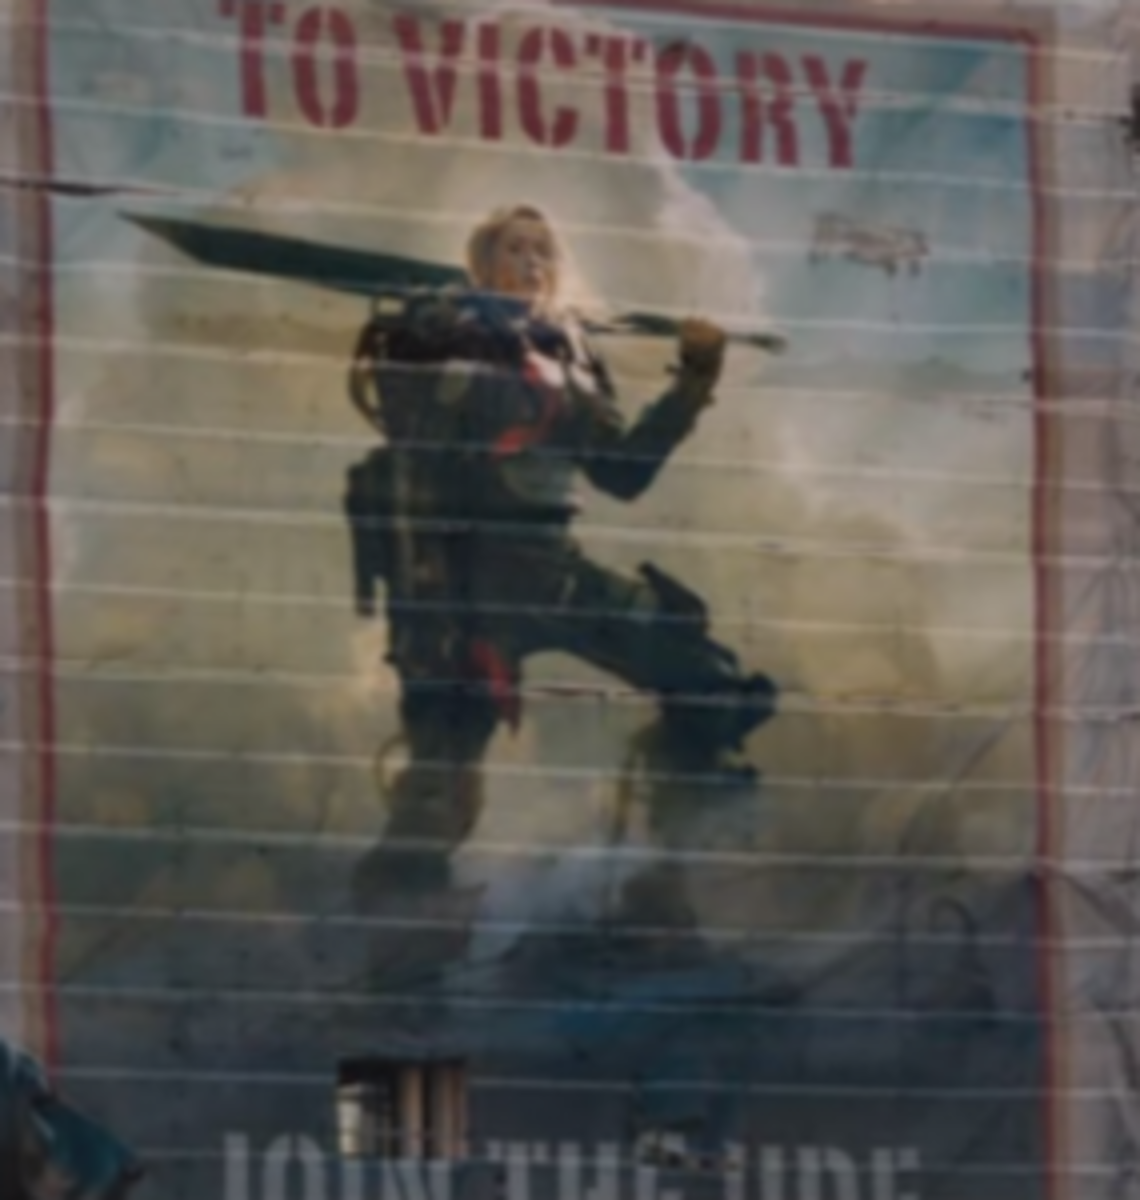 Sgt. Vrataski's recruiting poster. It would have added rich irony to the film if Major Cage, an enthusiastic coward, had earned one because of his special power.